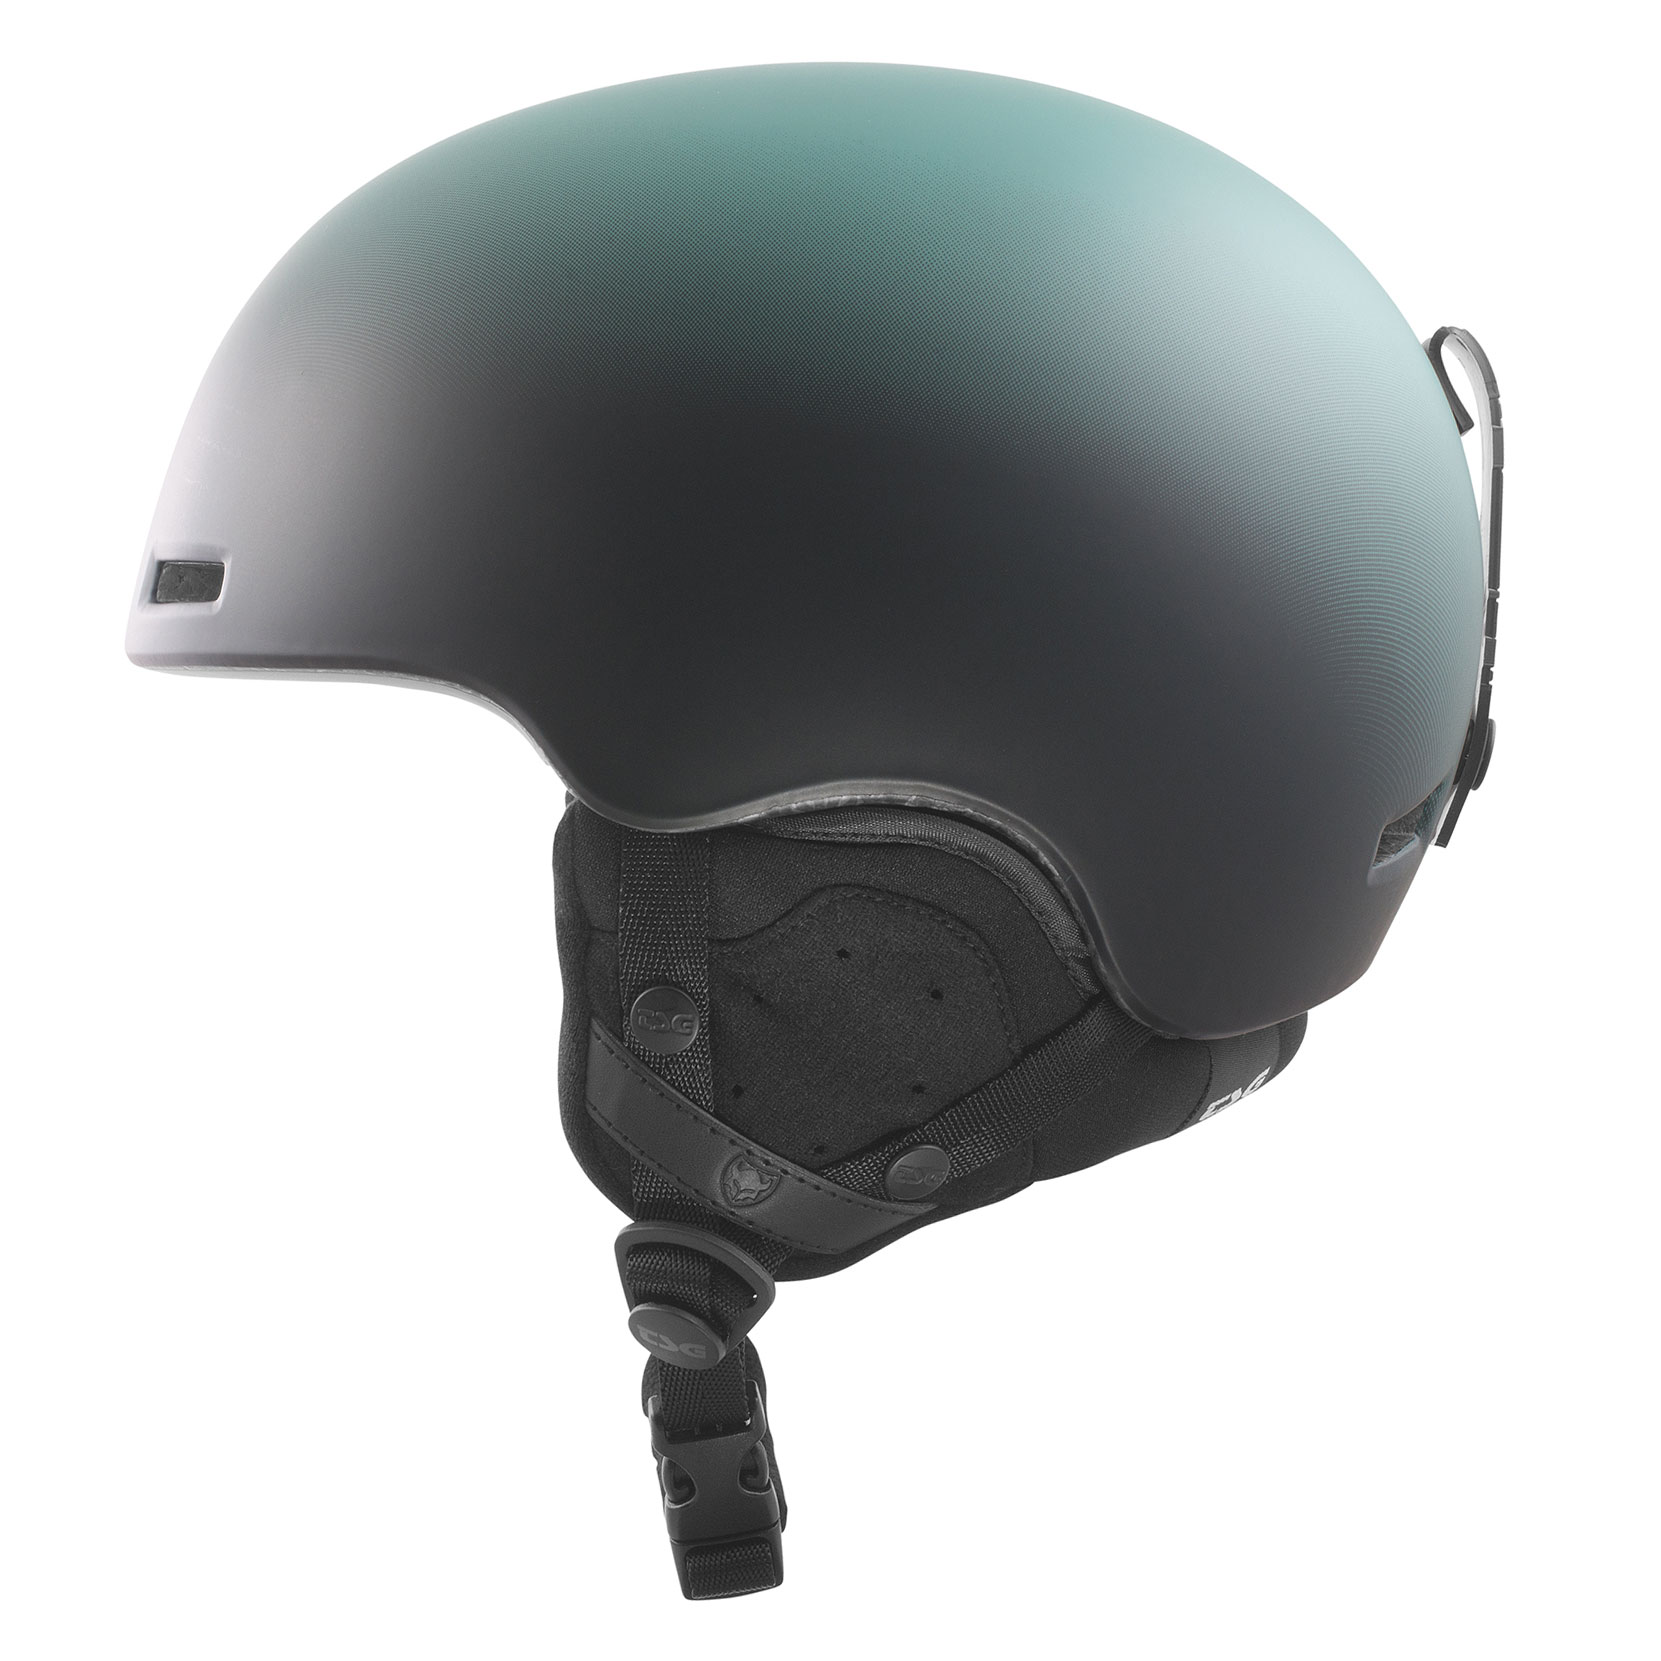 TSG Snowboardhelm Fly Special Makeup